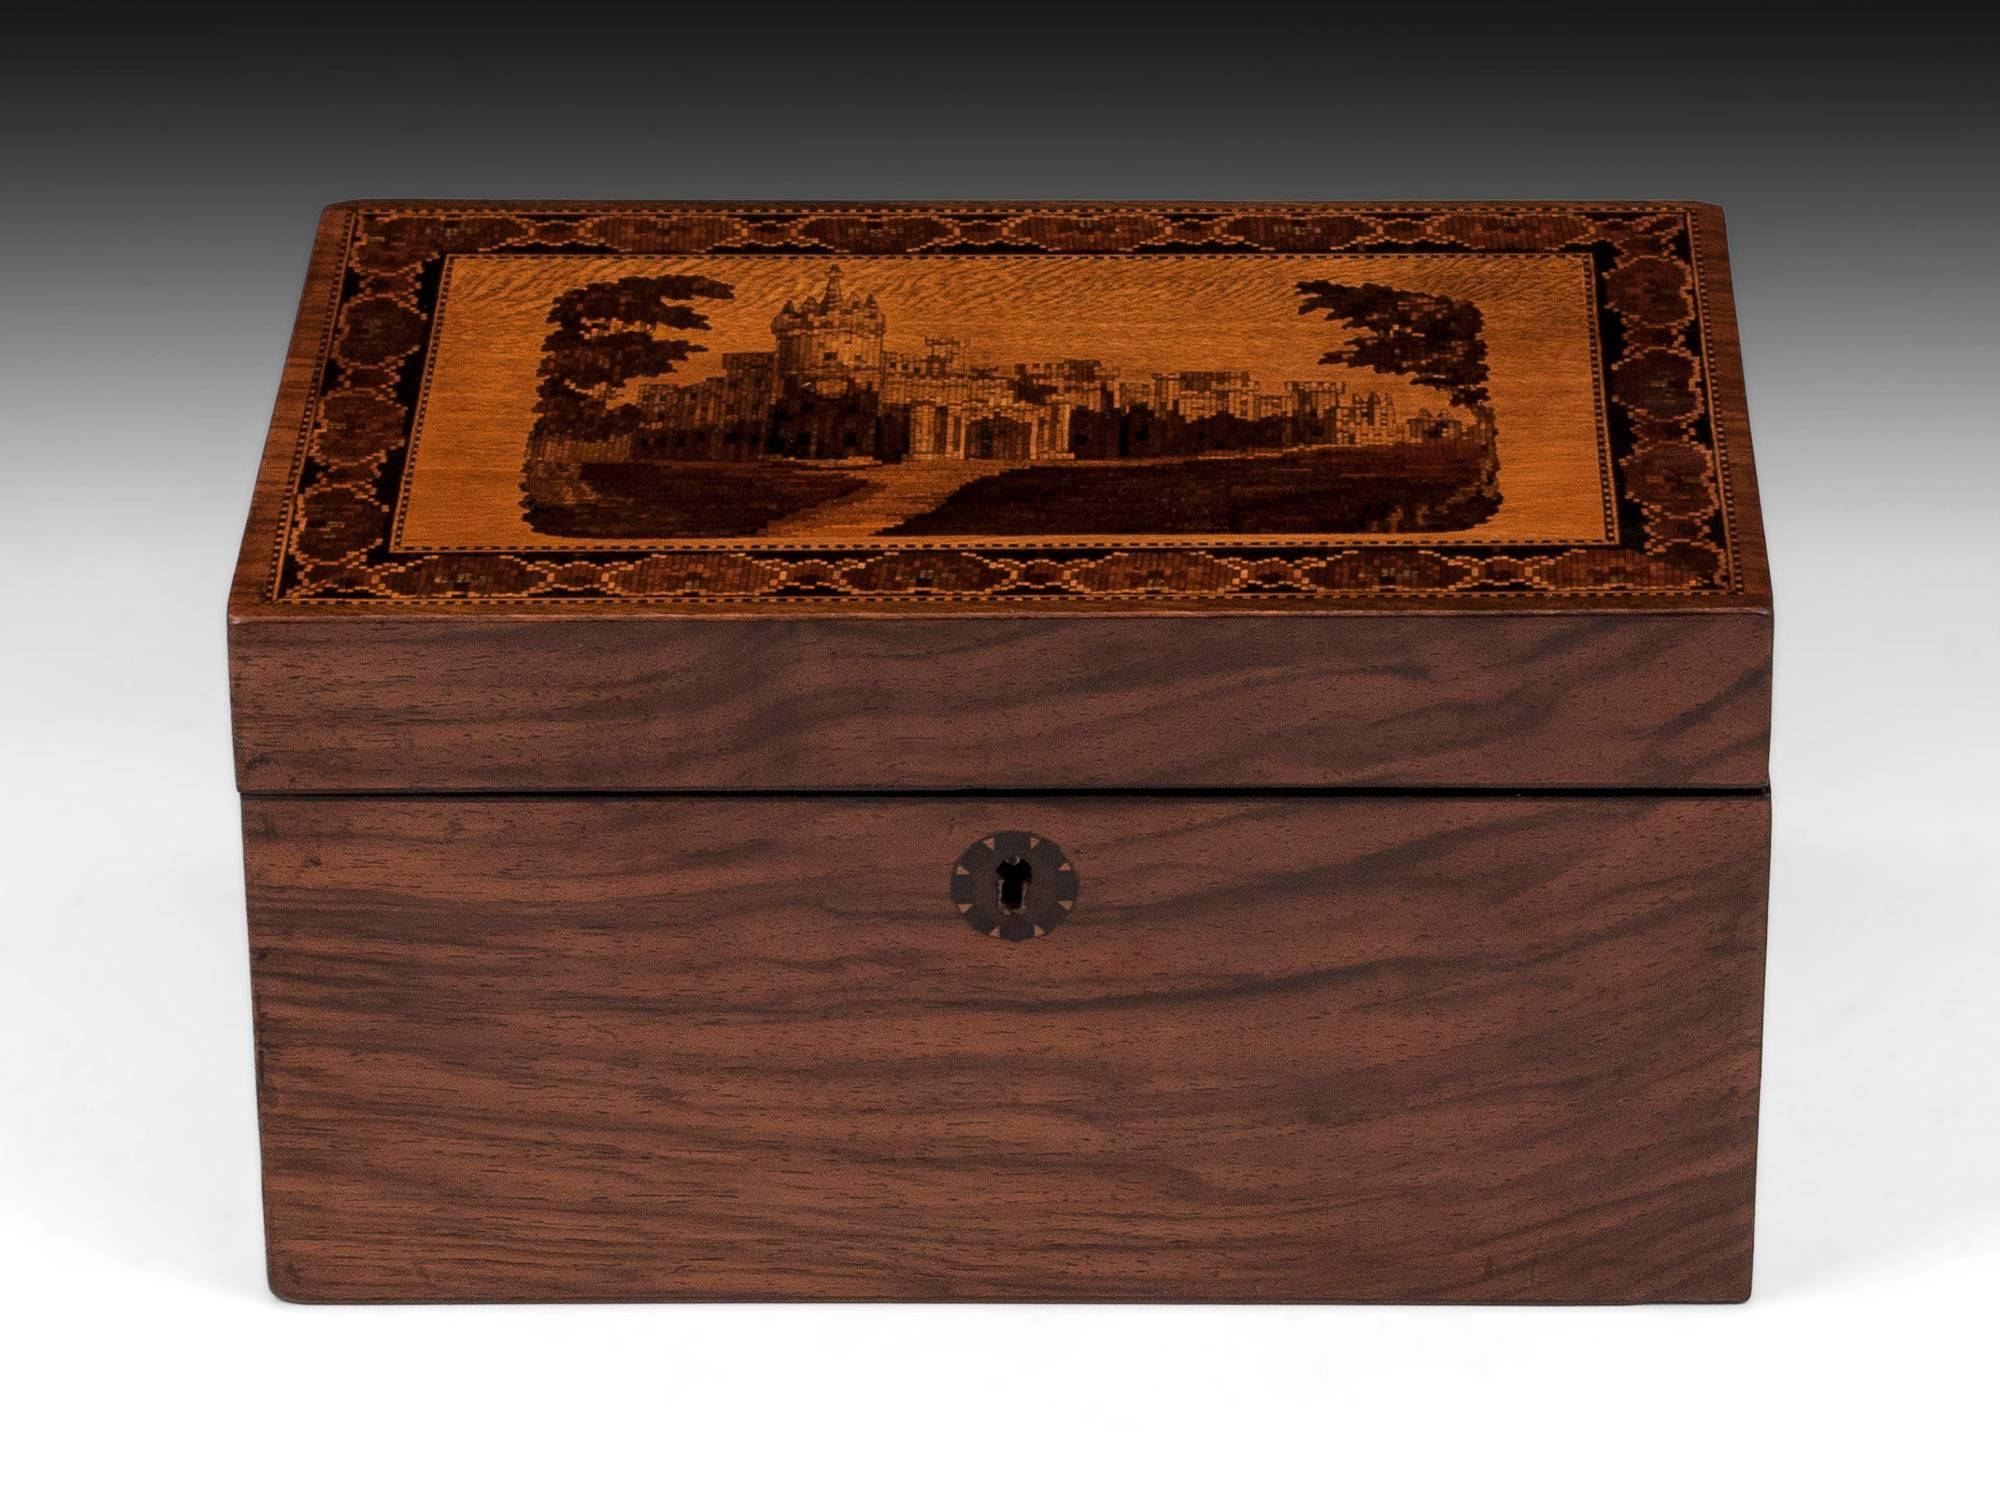 Tunbridge ware tea caddy with a view of Eridge castle on the top, veneered in Walnut. 

The interior of this Tunbridge ware tea caddy features two lidded compartments with traces of their original lining. On the back edge of the lid is a label which